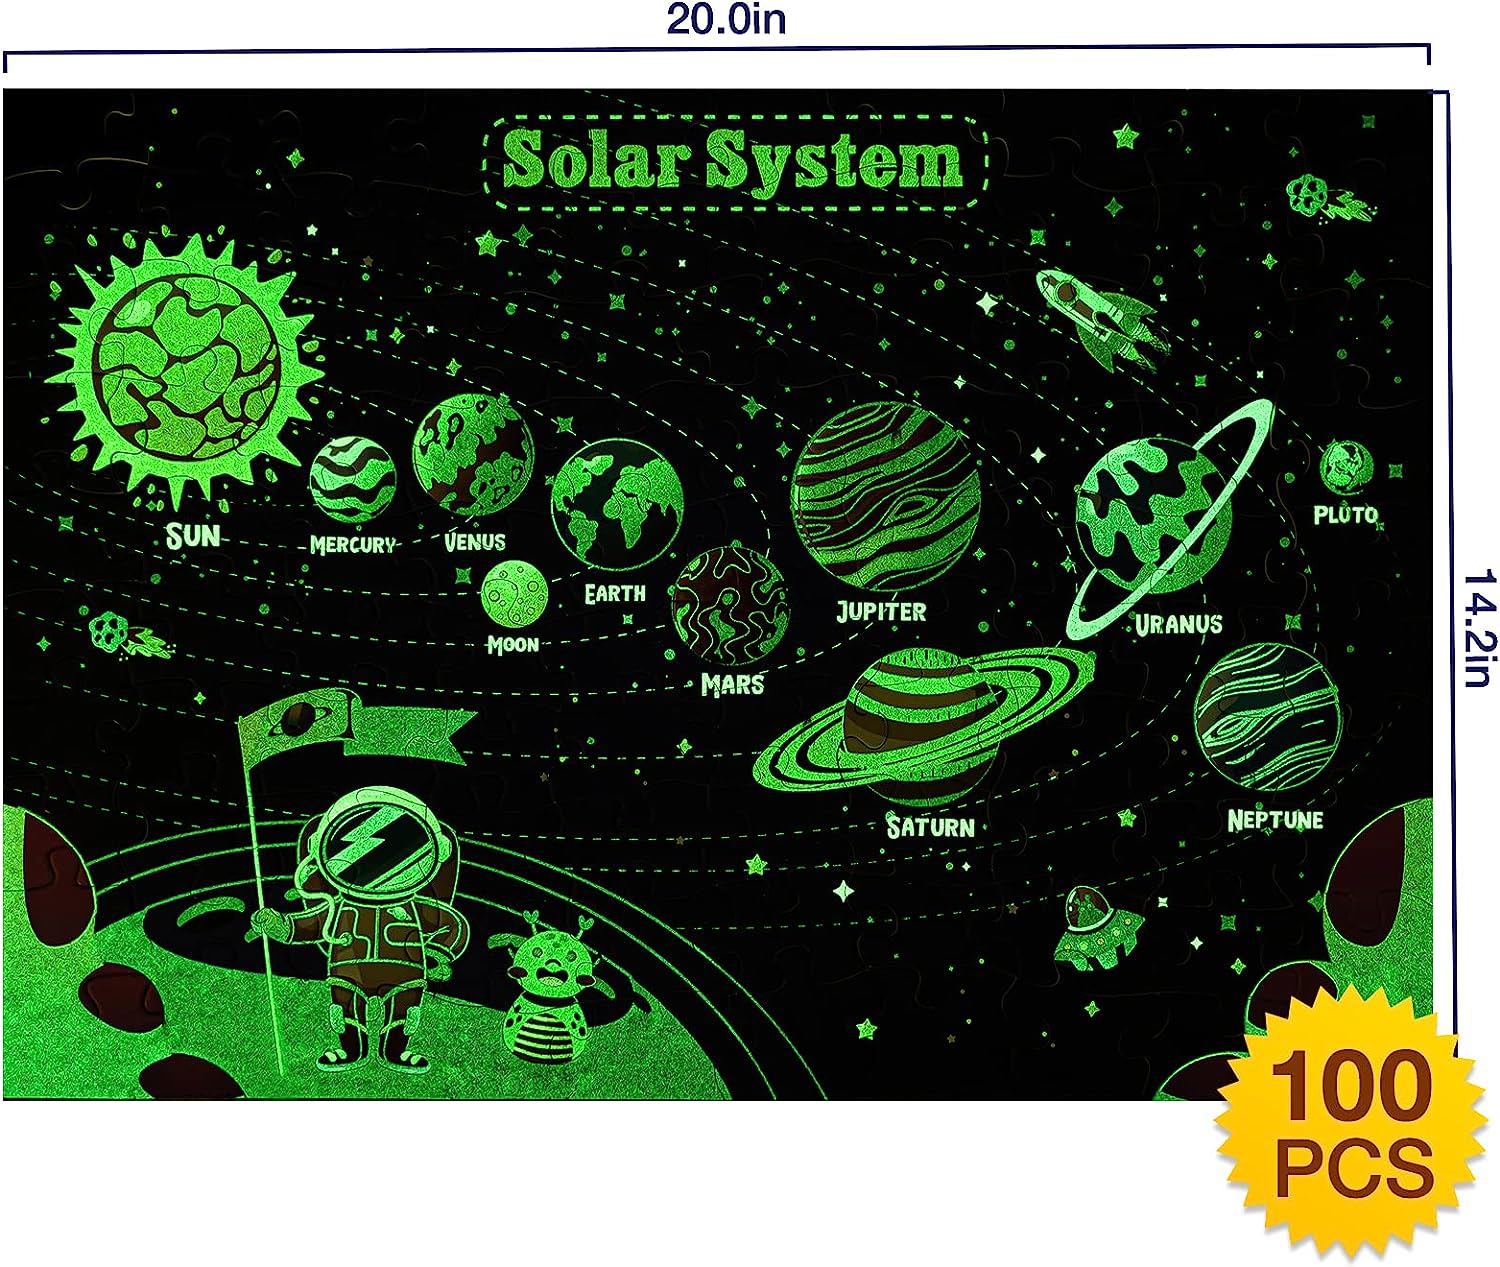 KidEwan Solar System Space Kids Puzzles,100 Pcs Space Puzzles for Kids Ages 4-8,Glow in The Dark Science Educational Toys for 3 4 5 6 7 8 Year Olds Boys Girls Toddler